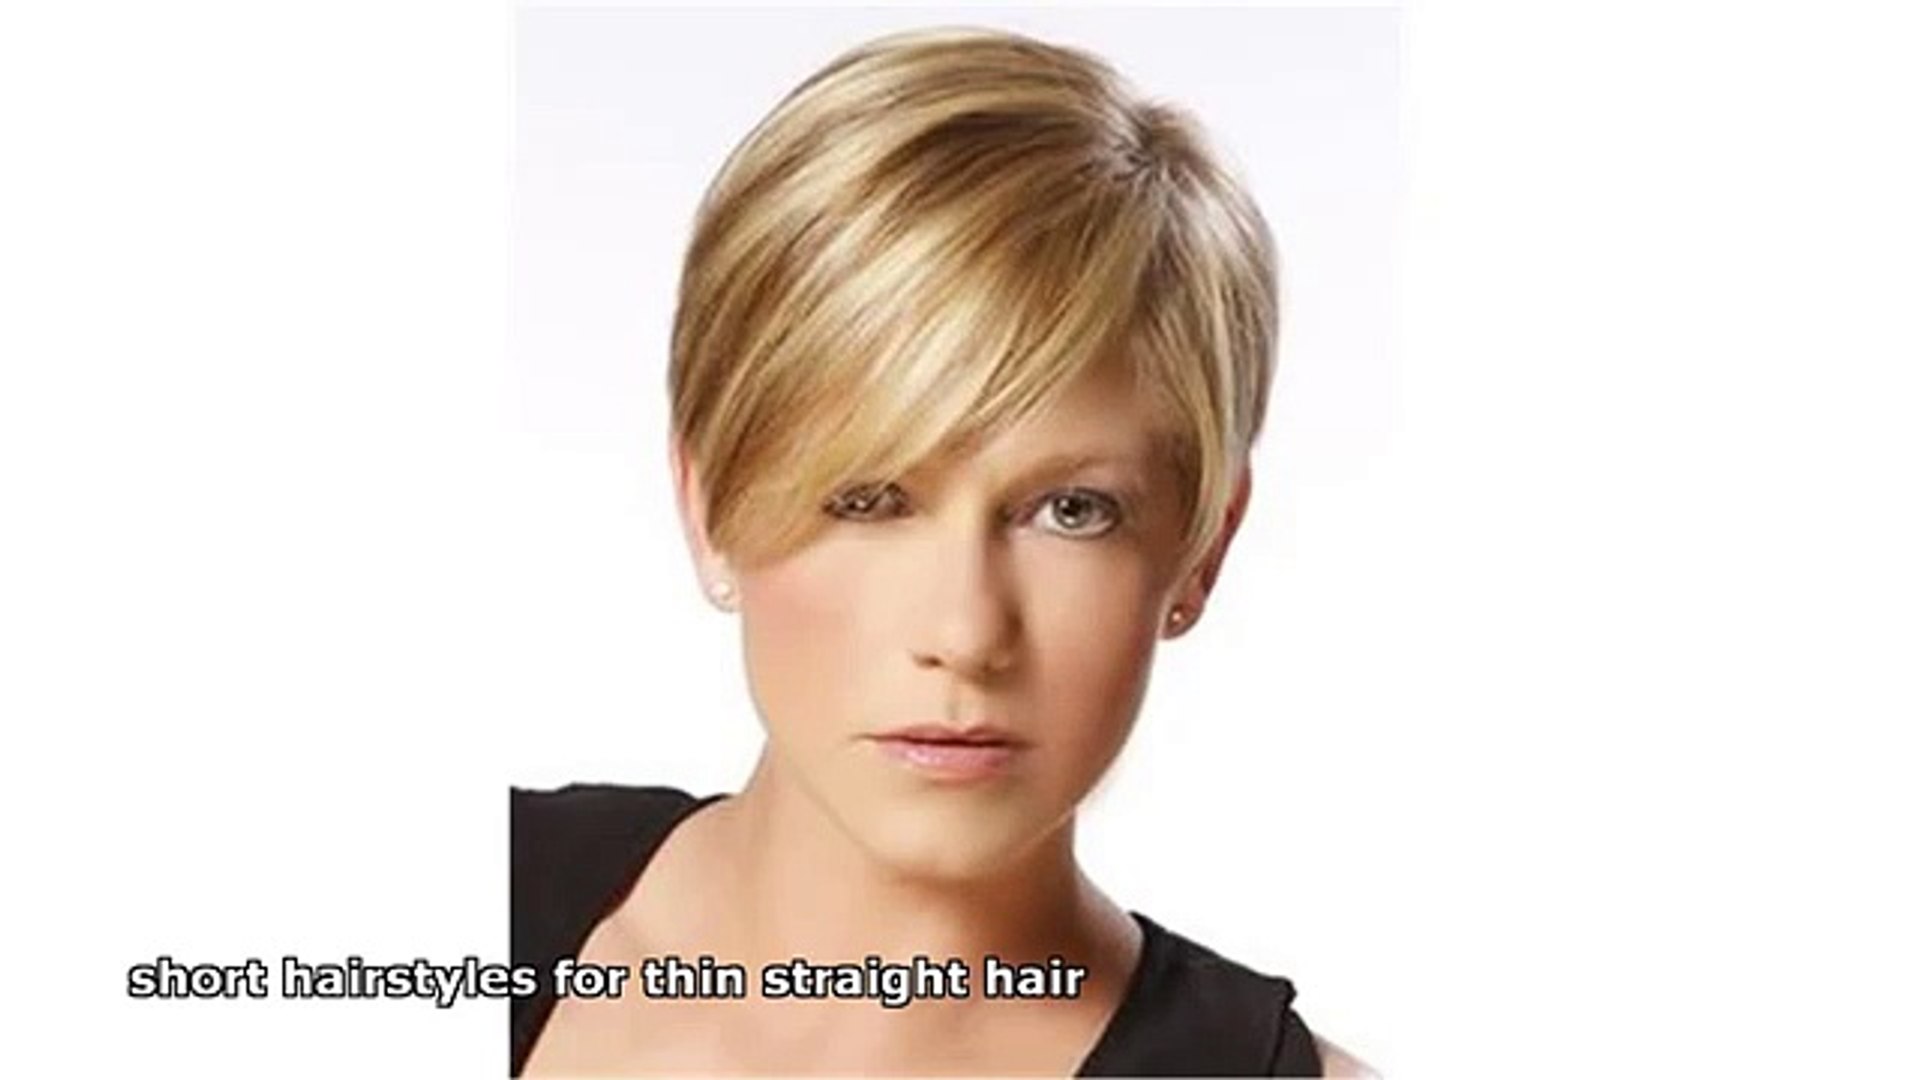 short hairstyles for thin straight hair - video Dailymotion